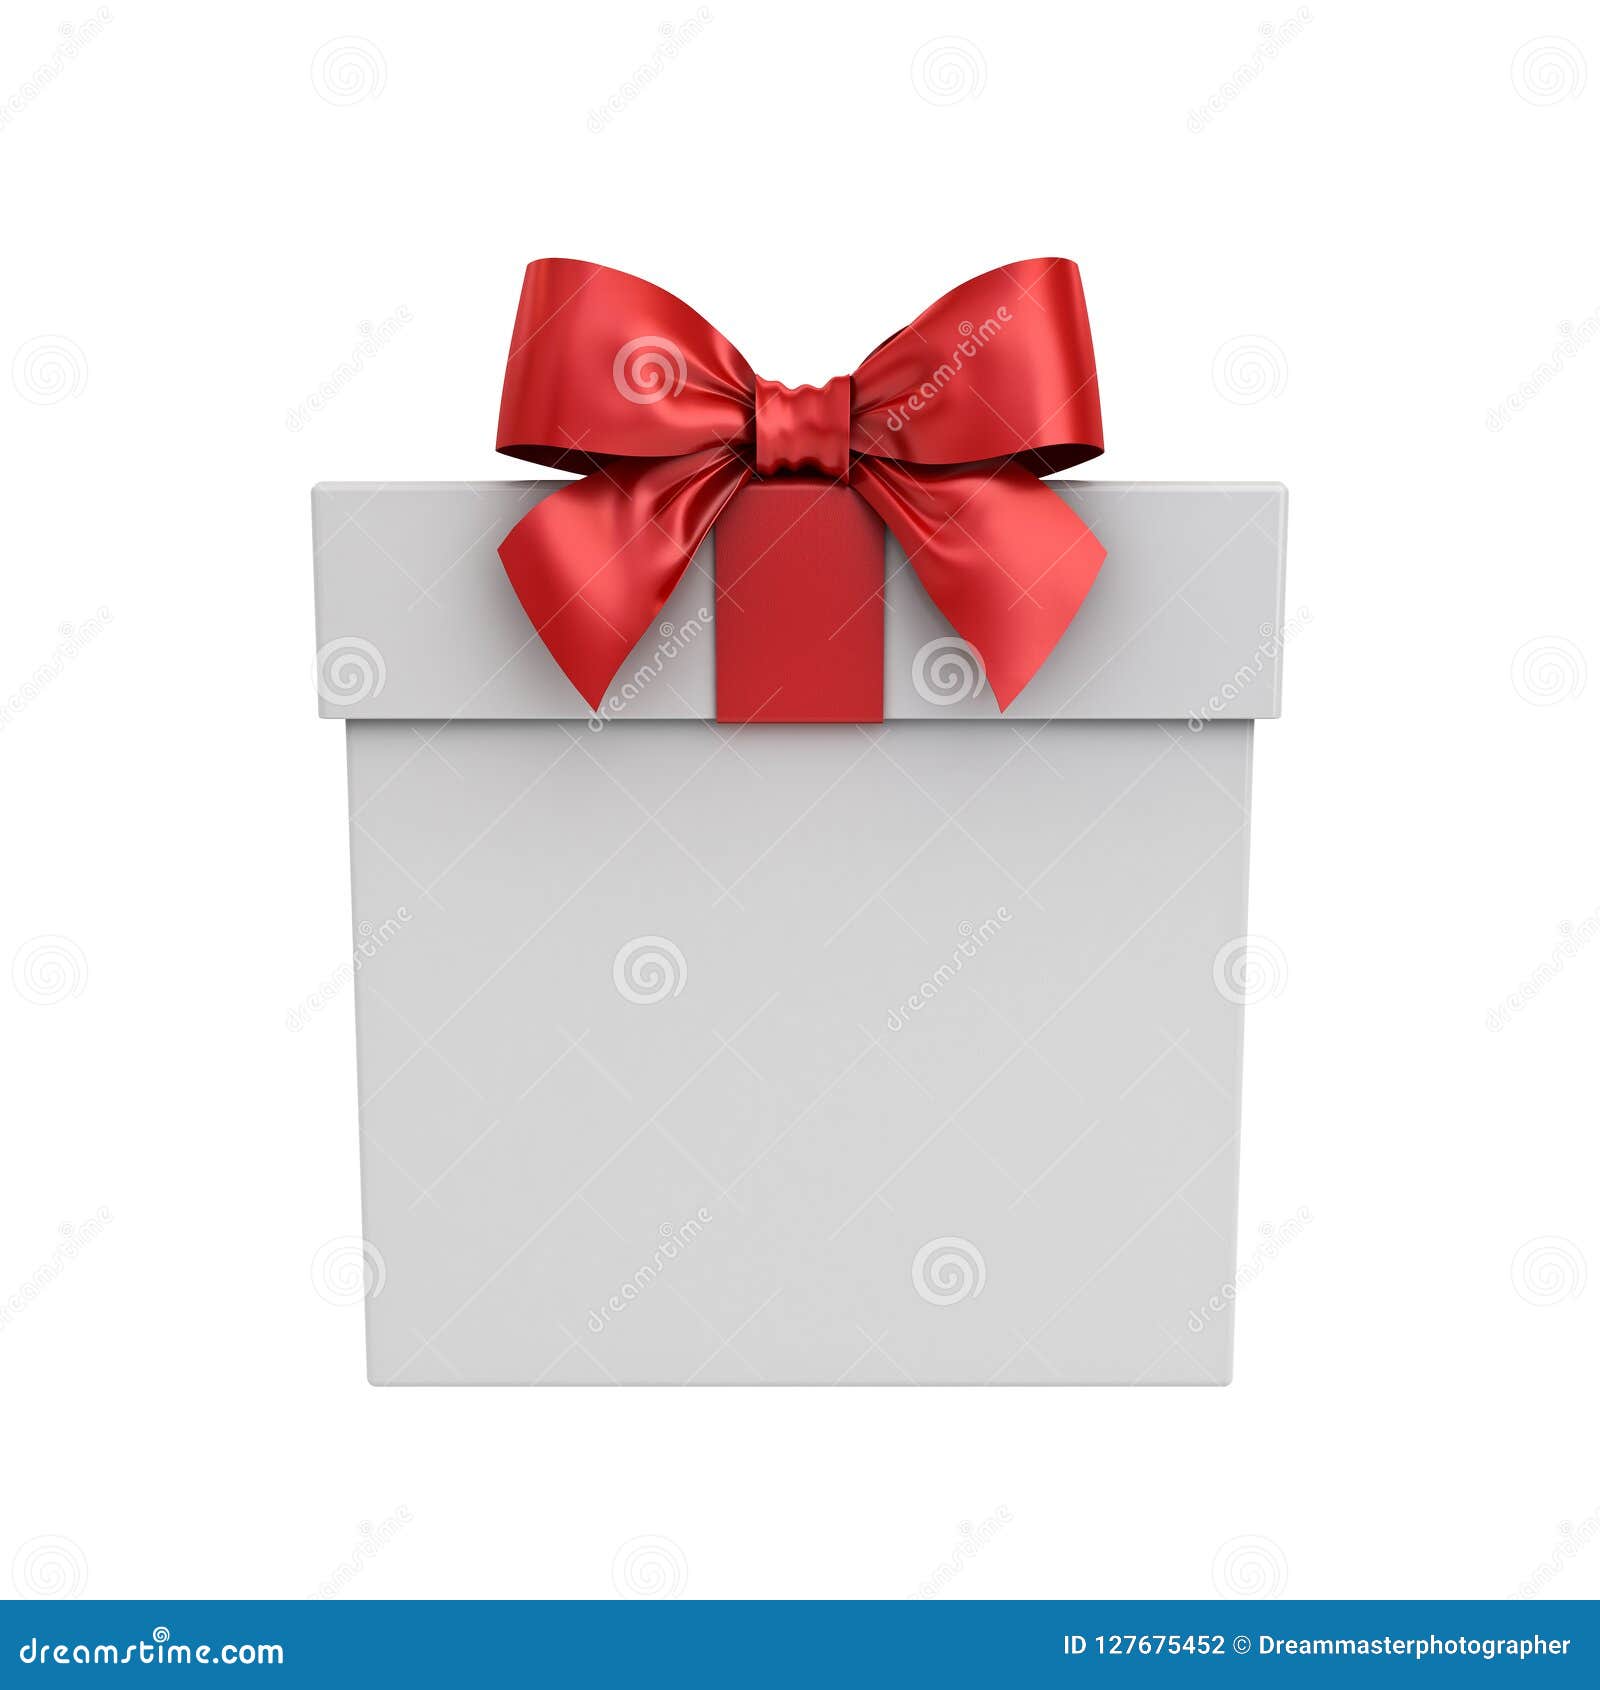 Set Of Red Satin Bow Isolated On White Vector Gift Bows For Page Decor  Stock Illustration - Download Image Now - iStock